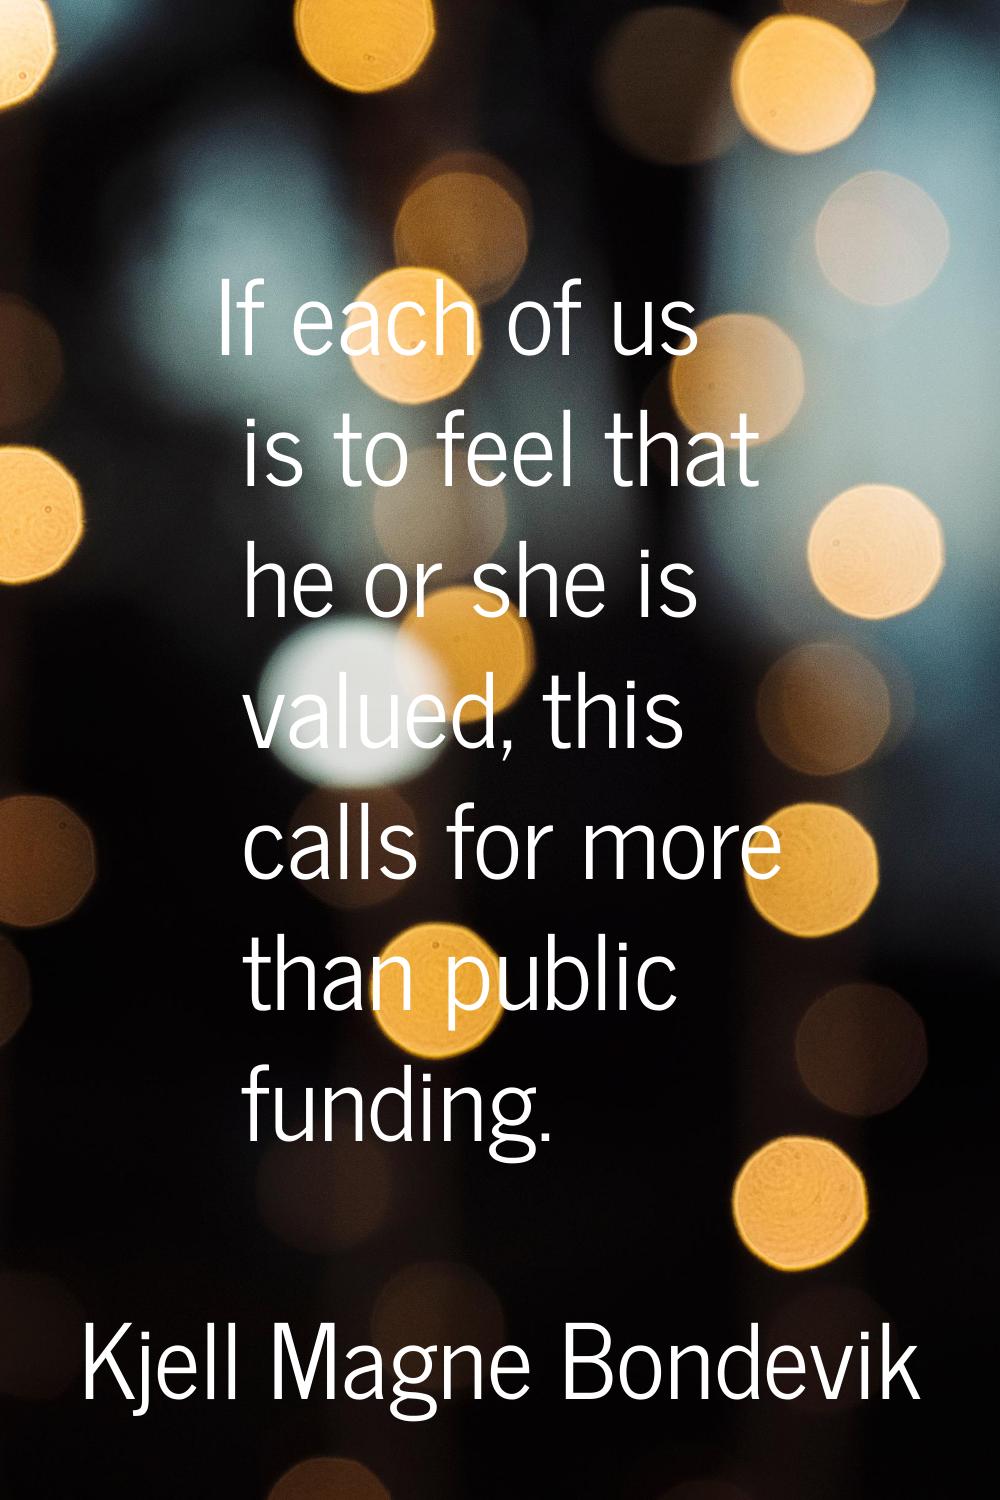 If each of us is to feel that he or she is valued, this calls for more than public funding.